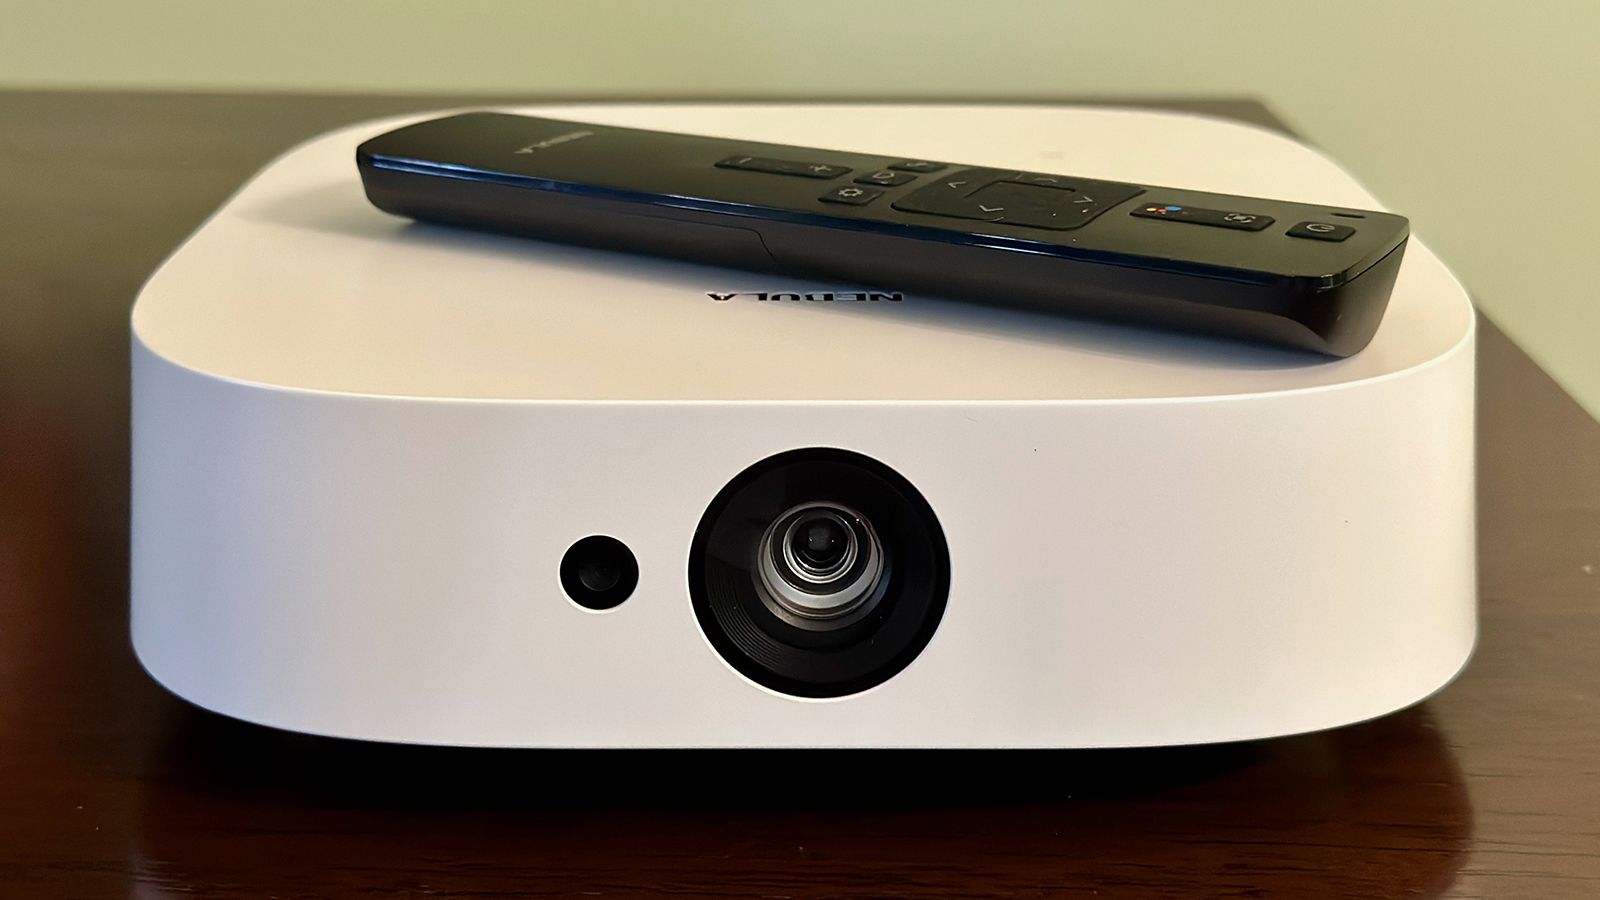 The best portable projectors you can buy right now